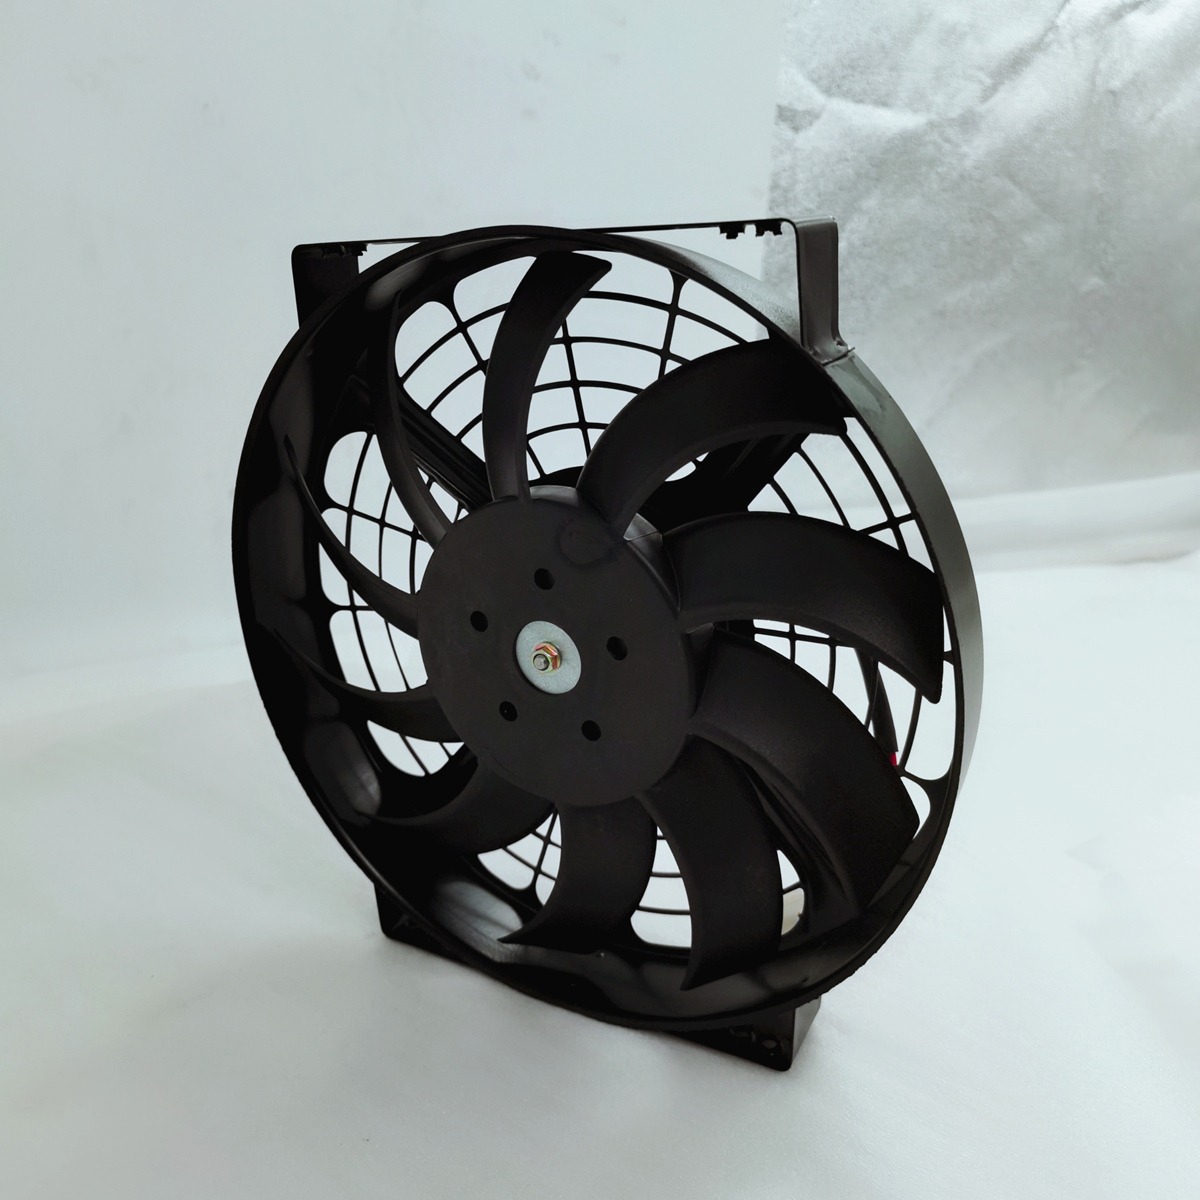 Low Price factory direct sale Aluminum Hard Motorcycle China tricycle Radiator fan